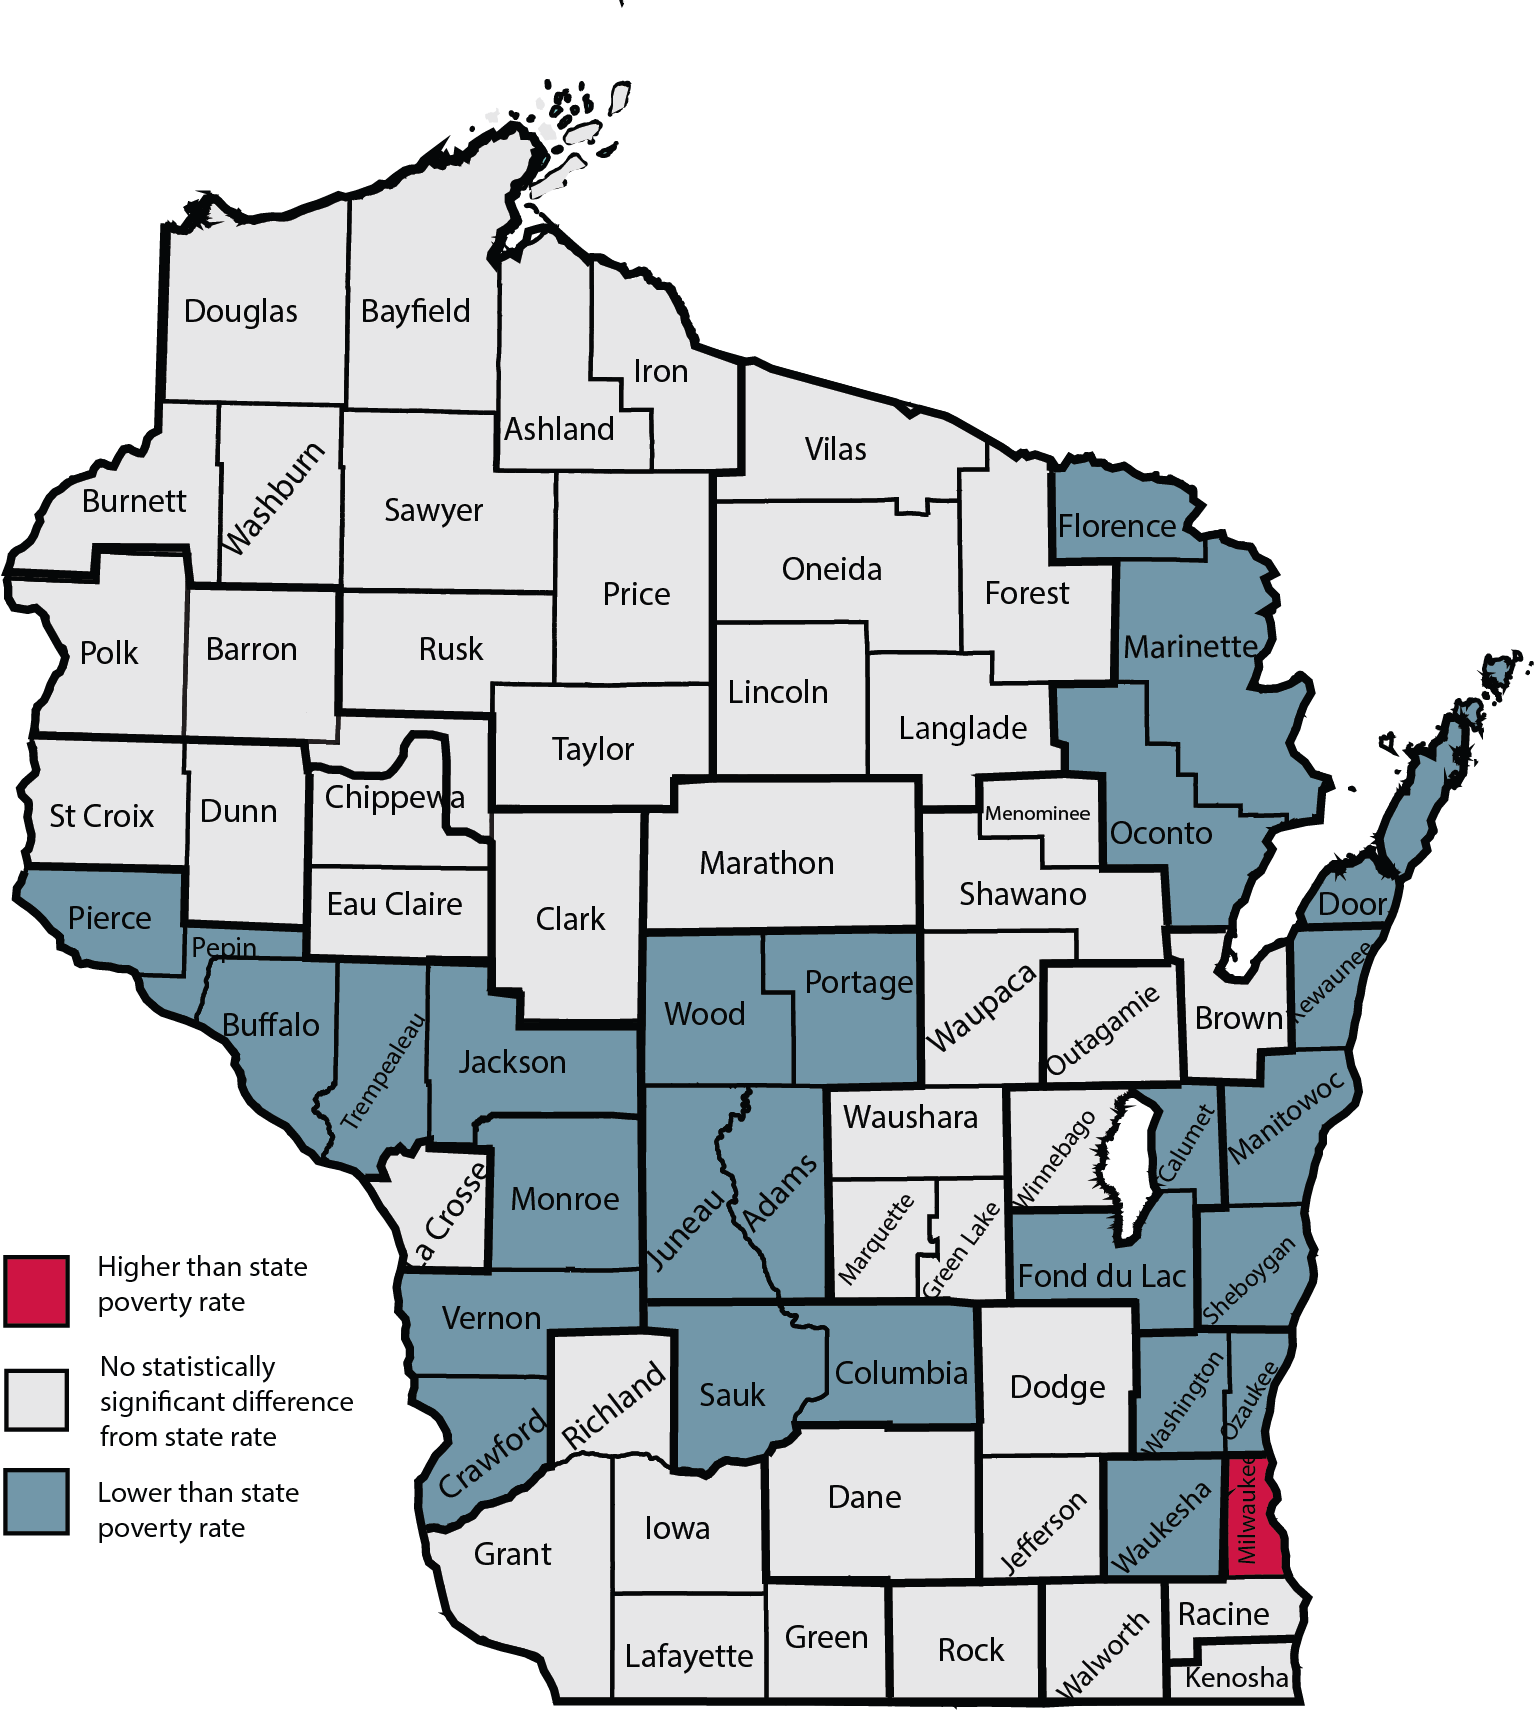 WPM county-/multicounty-level poverty rates vary a lot in relation to the overall state rate of 10.8%: 2016.